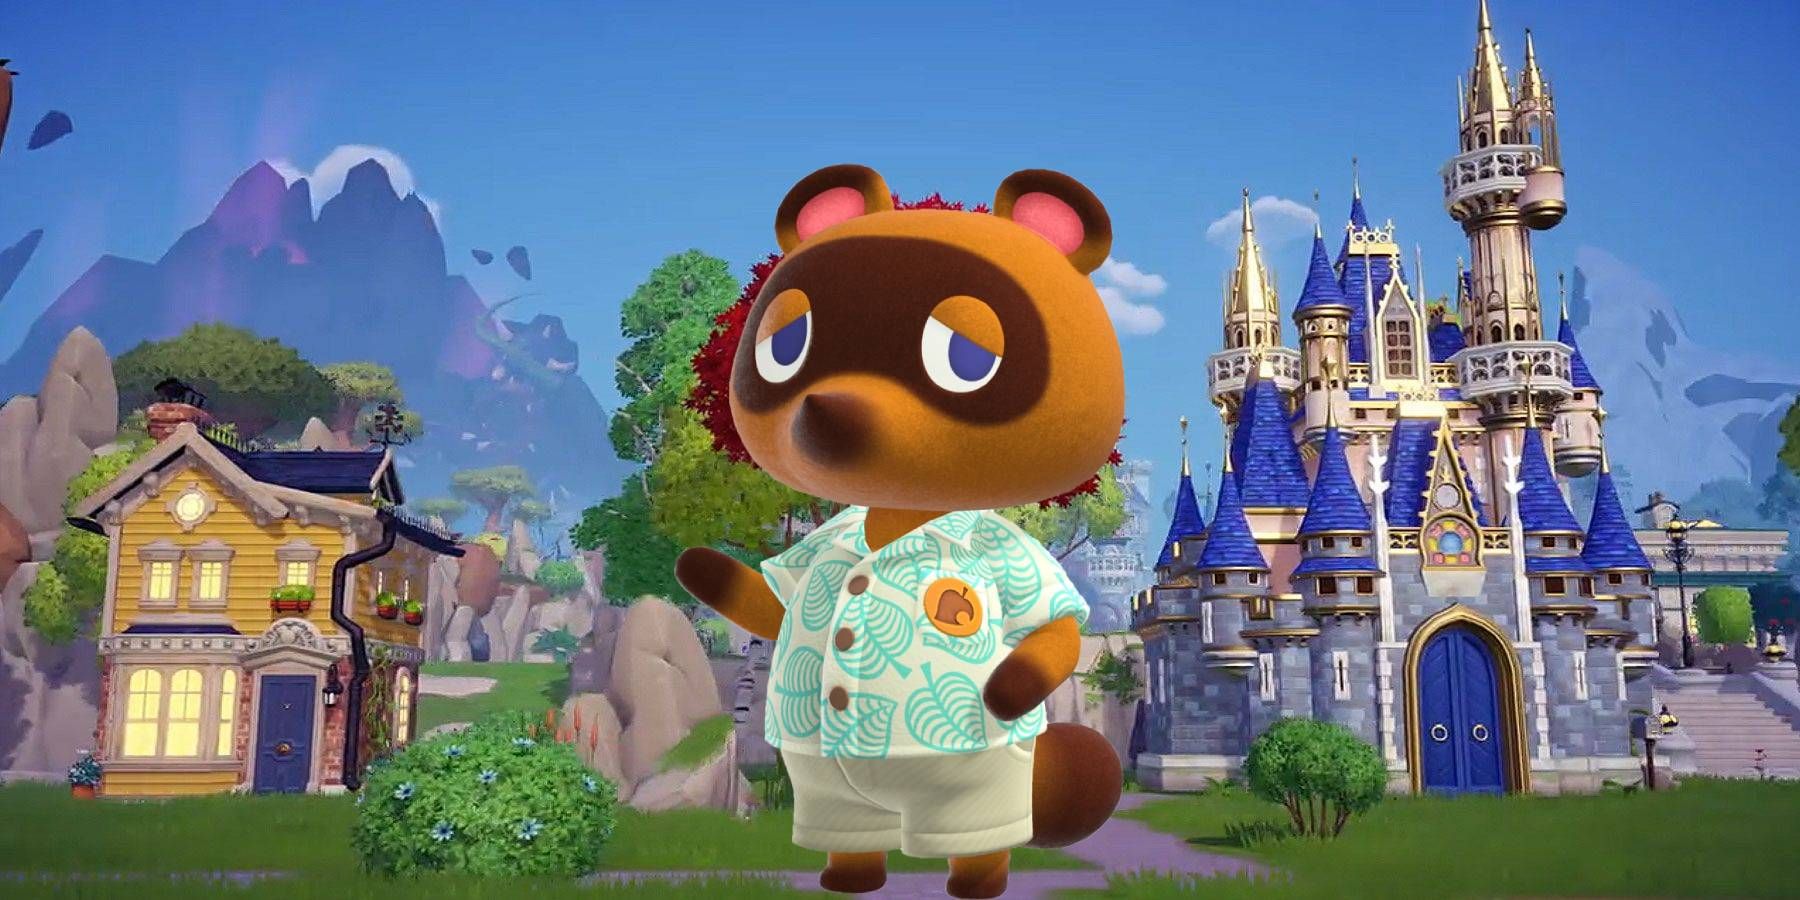 Tom Nook from Animal Crossing standing between a house and a castle in Disney Dreamlight Valley